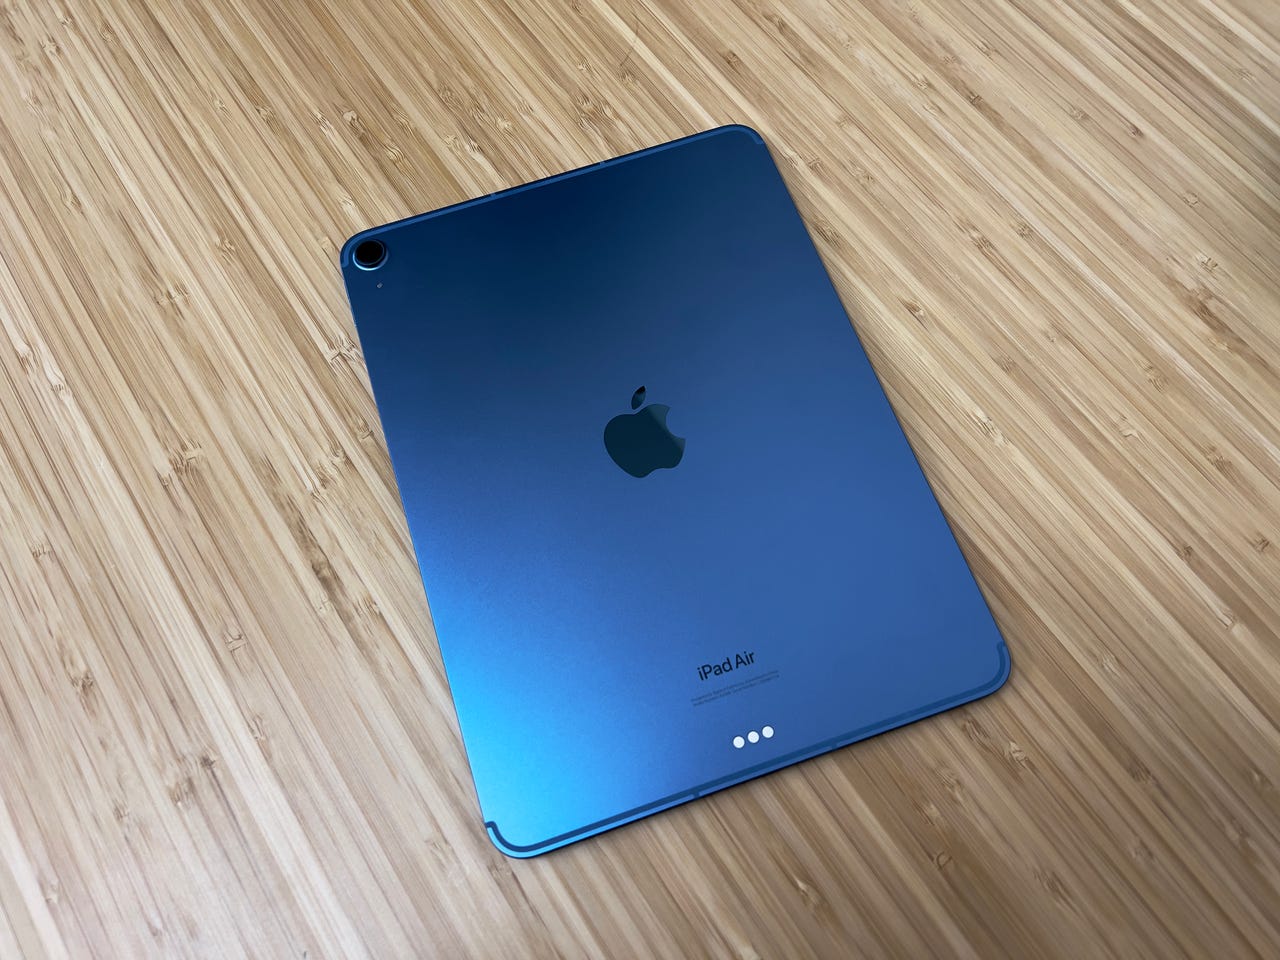 iPad Air (2022) review: So good I almost regret buying my iPad Pro